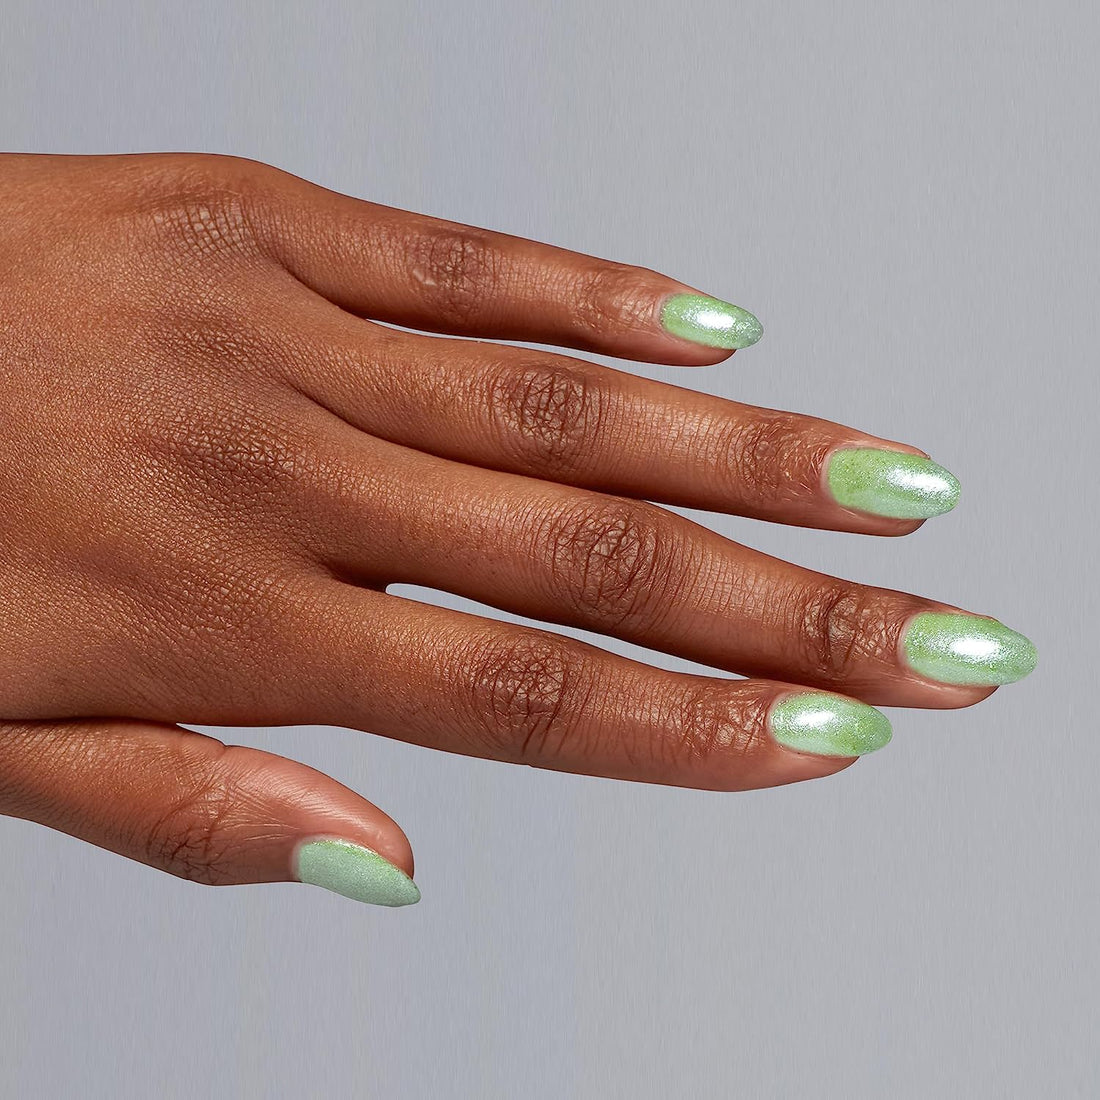 OPI GelColor Taurus-T Me GCH015 Mint Green Shimmer Gel Nail Polish Big Zodiac Energy Collection Fall 2023